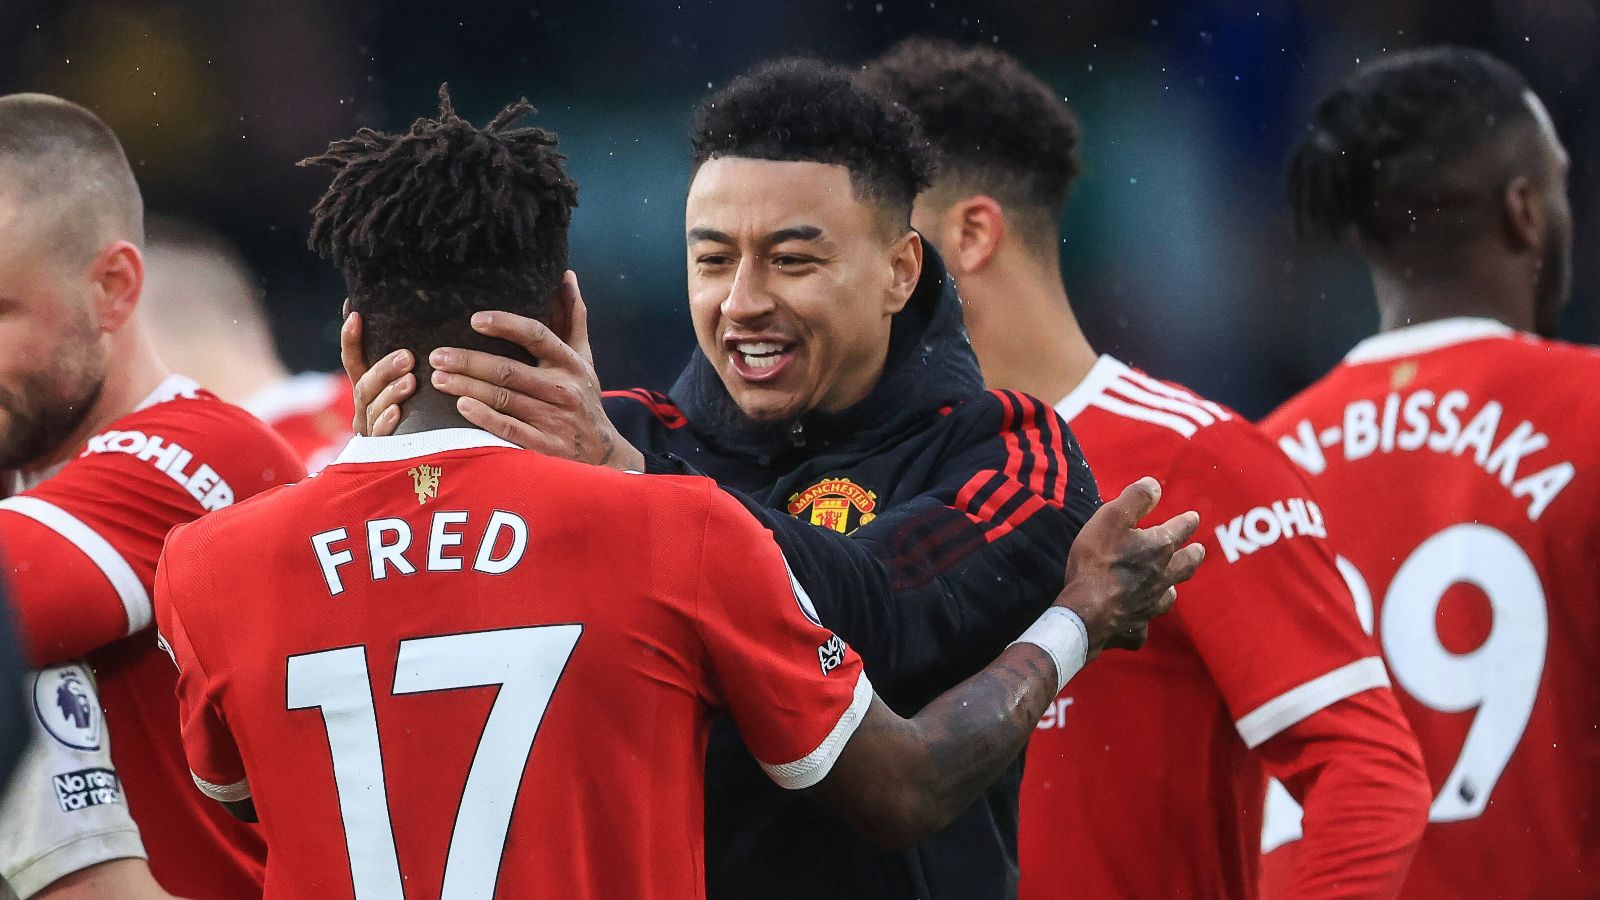 3 Ups and 13 Downs From Manchester United's 2021/22 Season